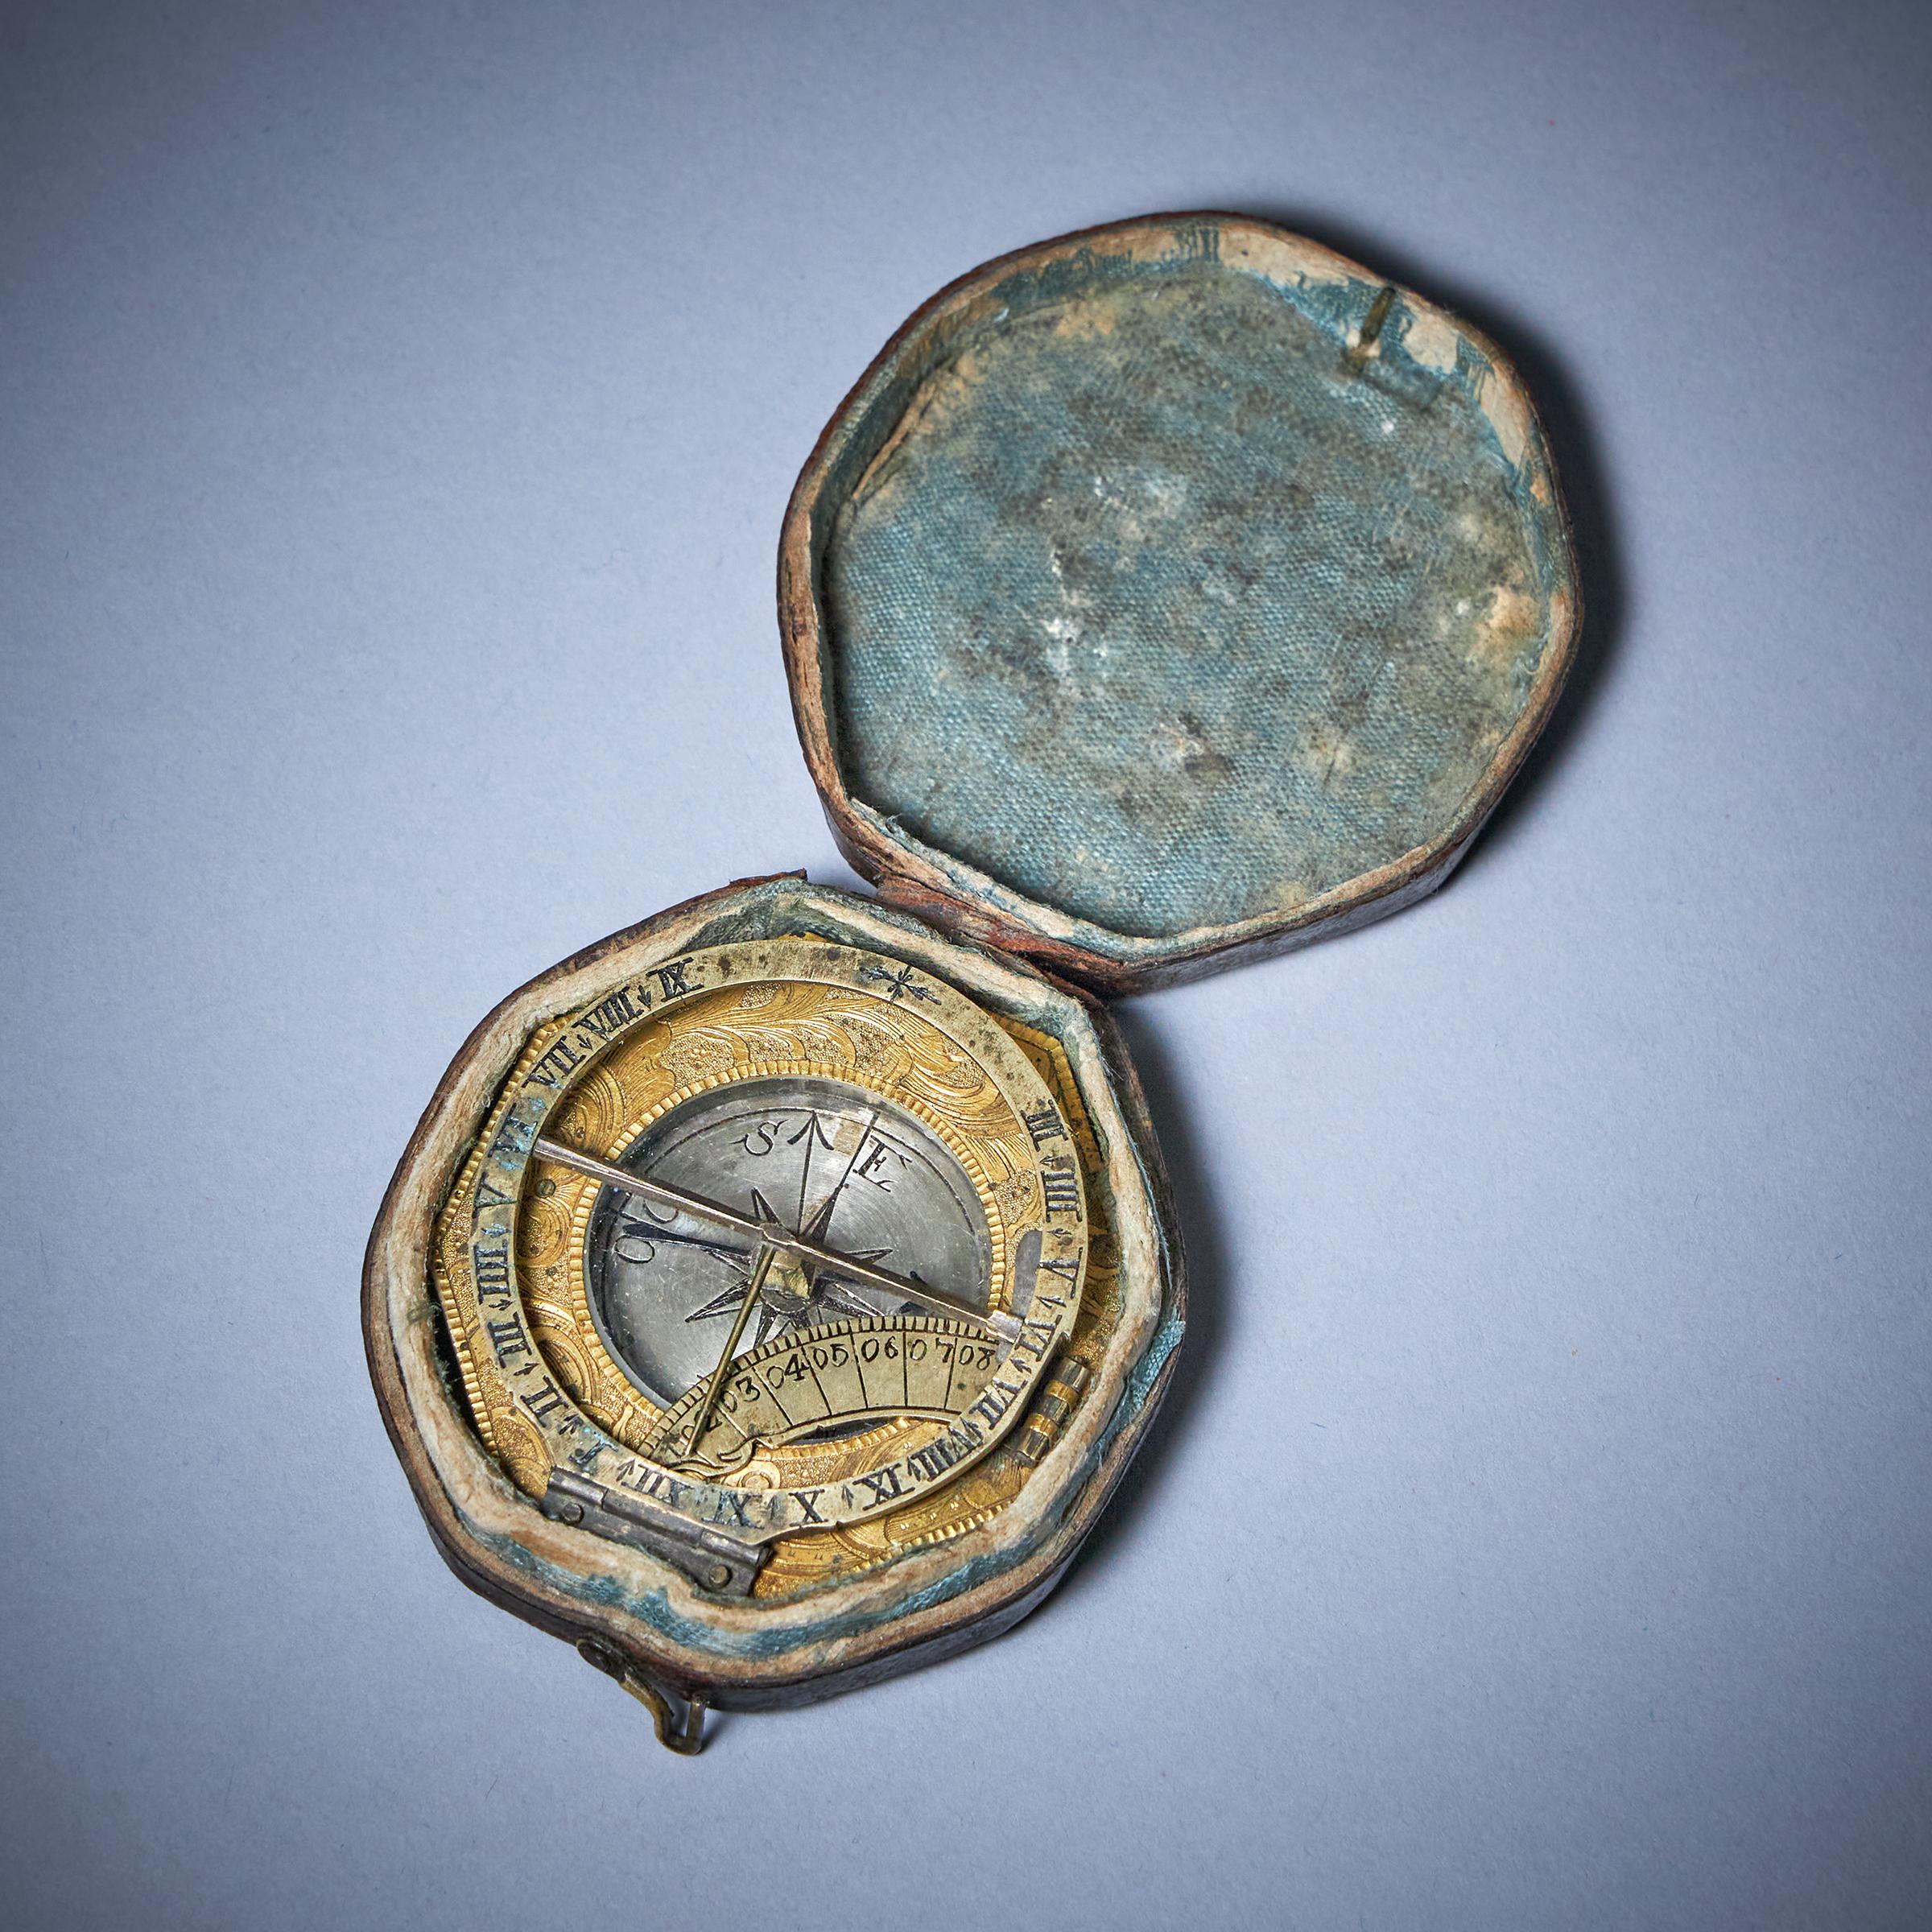 A Fine 18th century gilt brass and silver pocket sundial with Travelling case, c. 1750.
 
A richly engraved gilt brass and silver German equinoctial sundial, monogrammed on the back IGV (for Johann Georg Vogler). The octagonal gilt brass base has